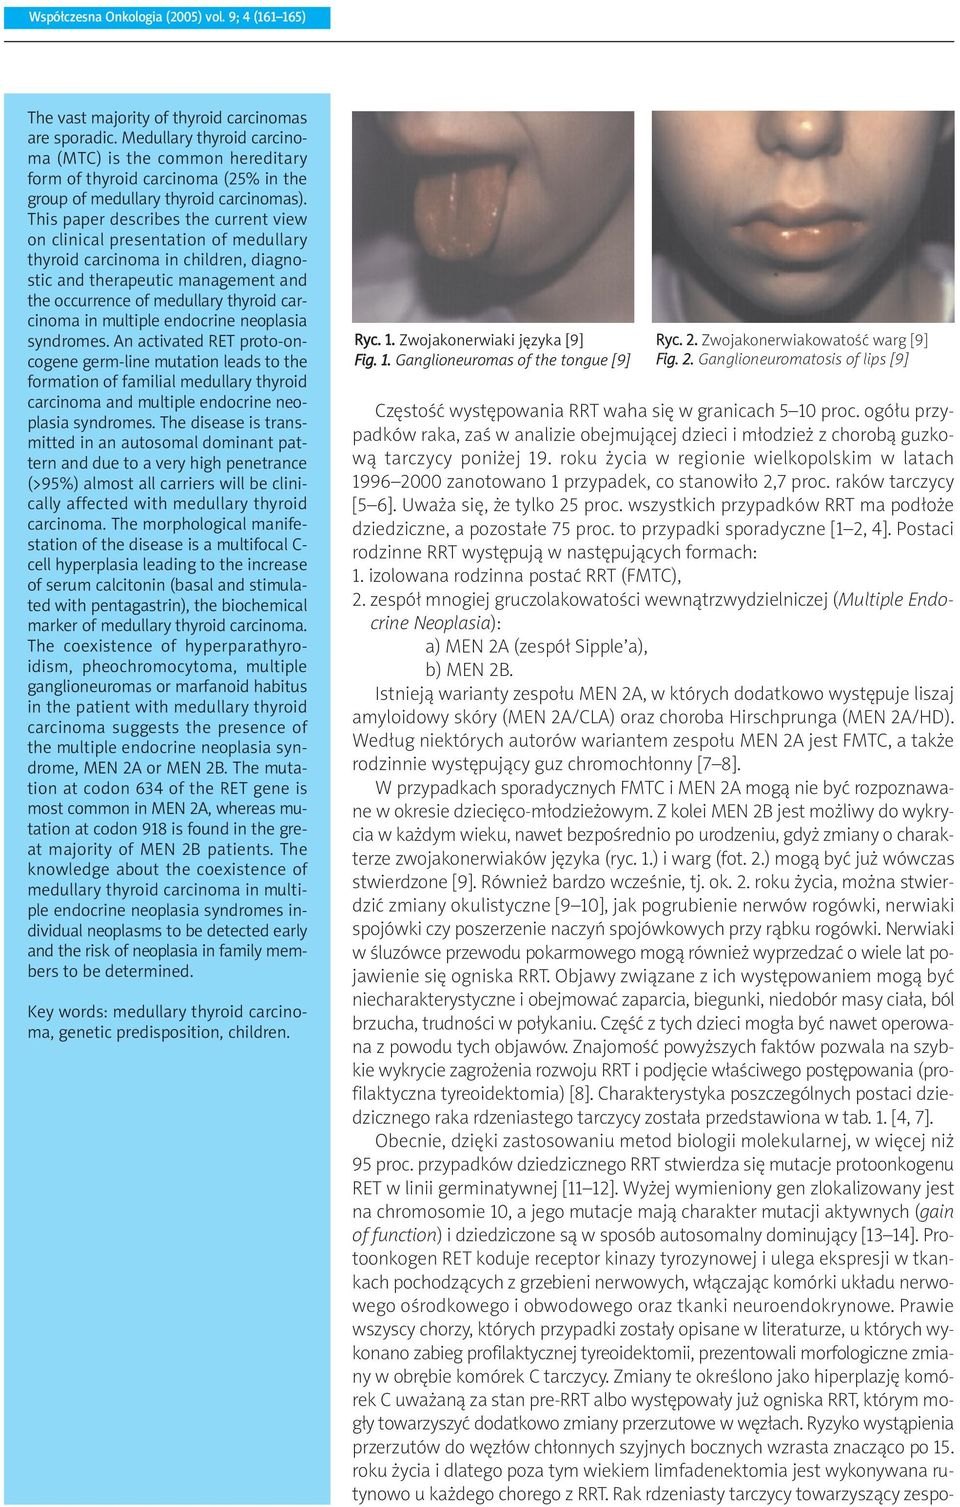 This paper describes the current view on clinical presentation of medullary thyroid carcinoma in children, diagnostic and therapeutic management and the occurrence of medullary thyroid carcinoma in